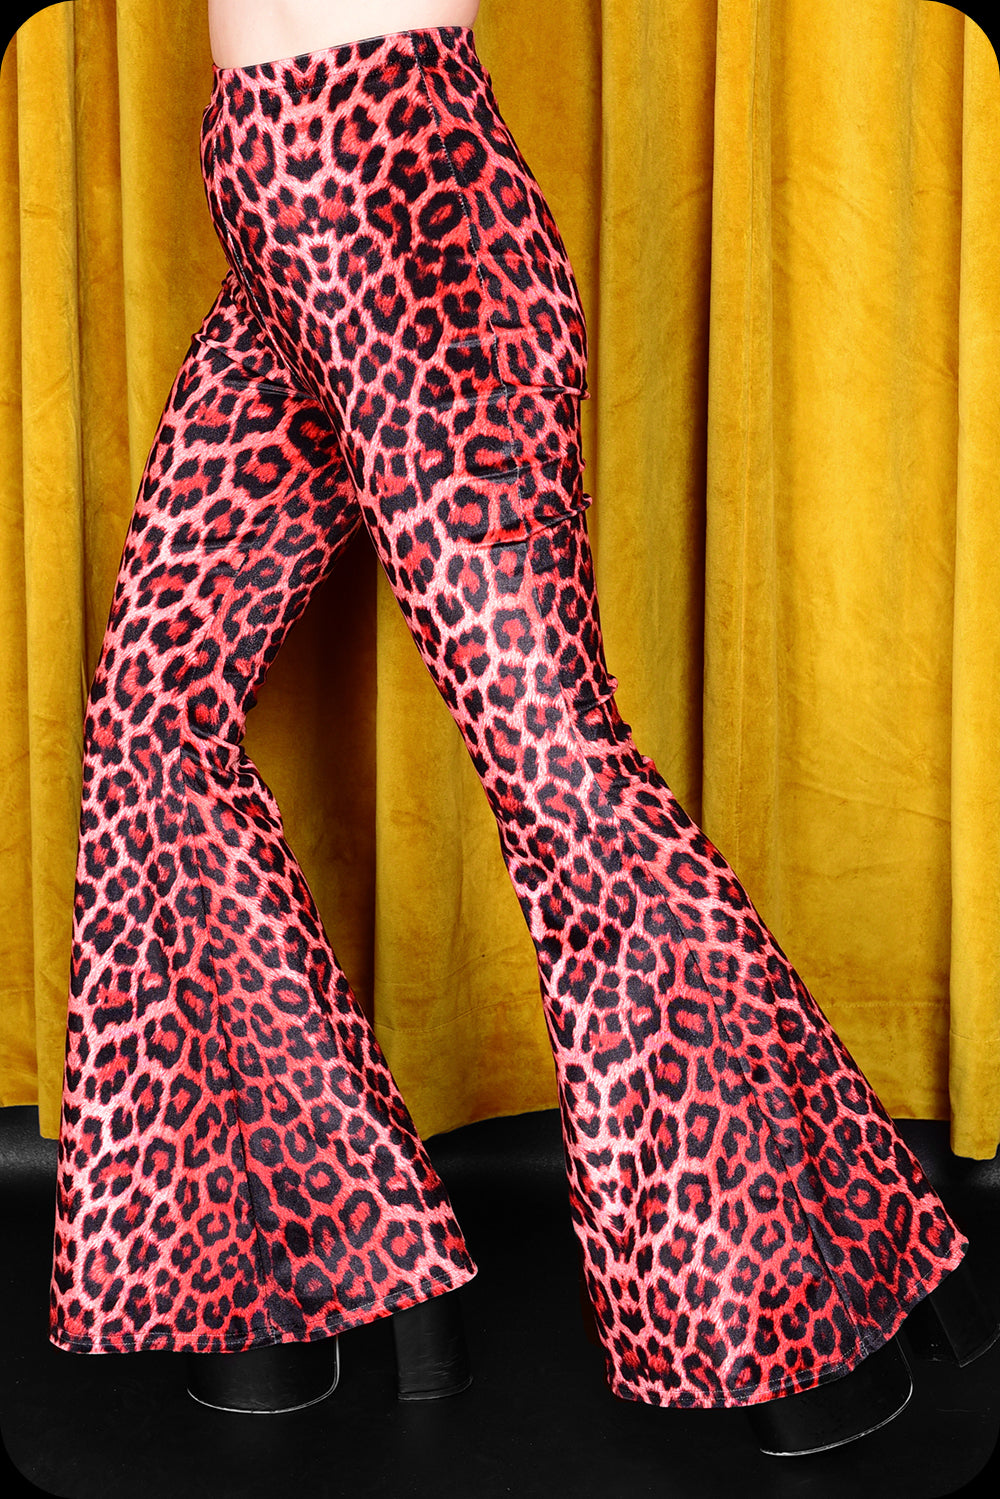 A pair of red leopard print velvet bell bottom trousers by Scorpio Rising